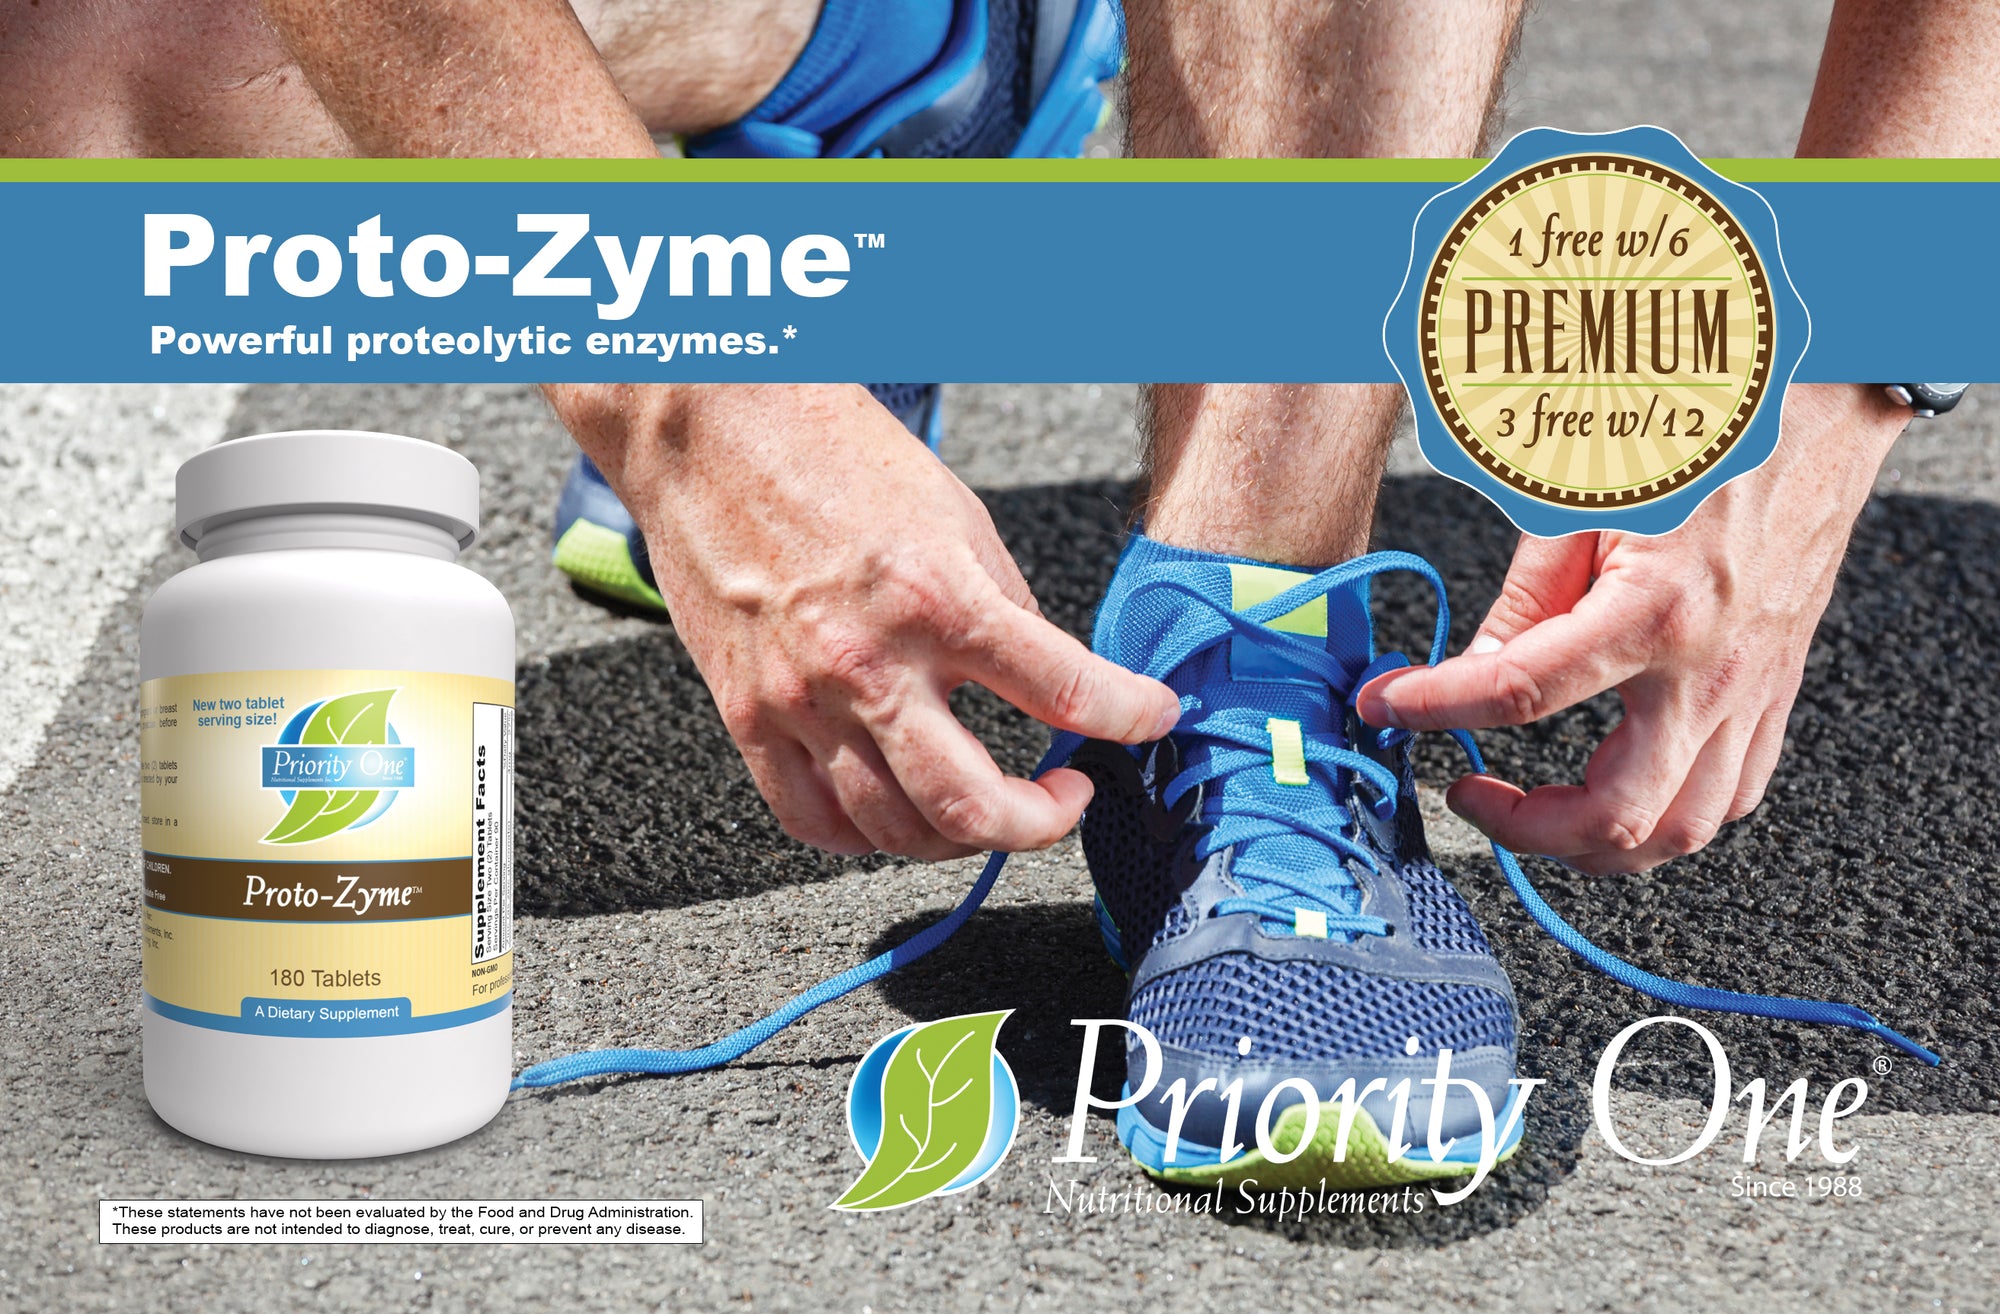 Proto-Zyme (180 Tablets)  New two tablet serving!